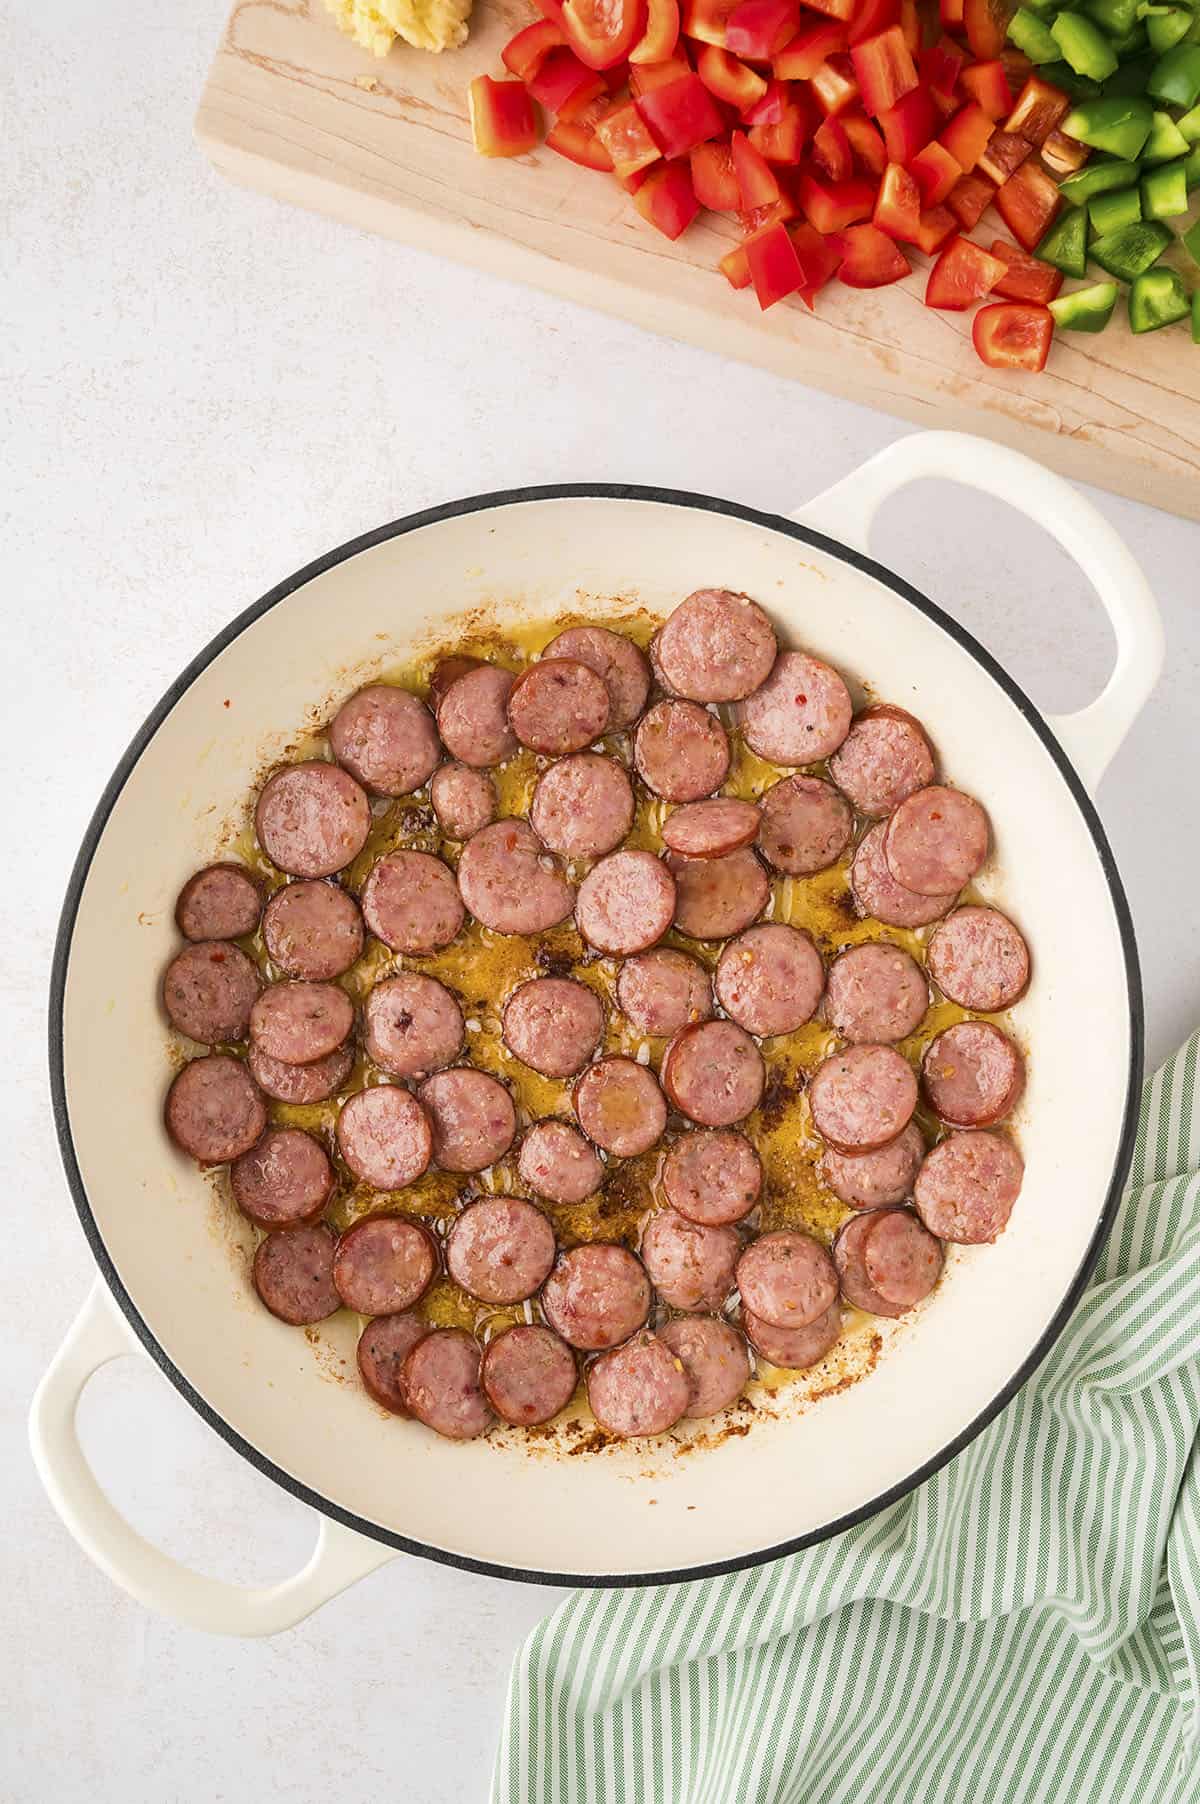 Andouille sausage being browned in a skillet.